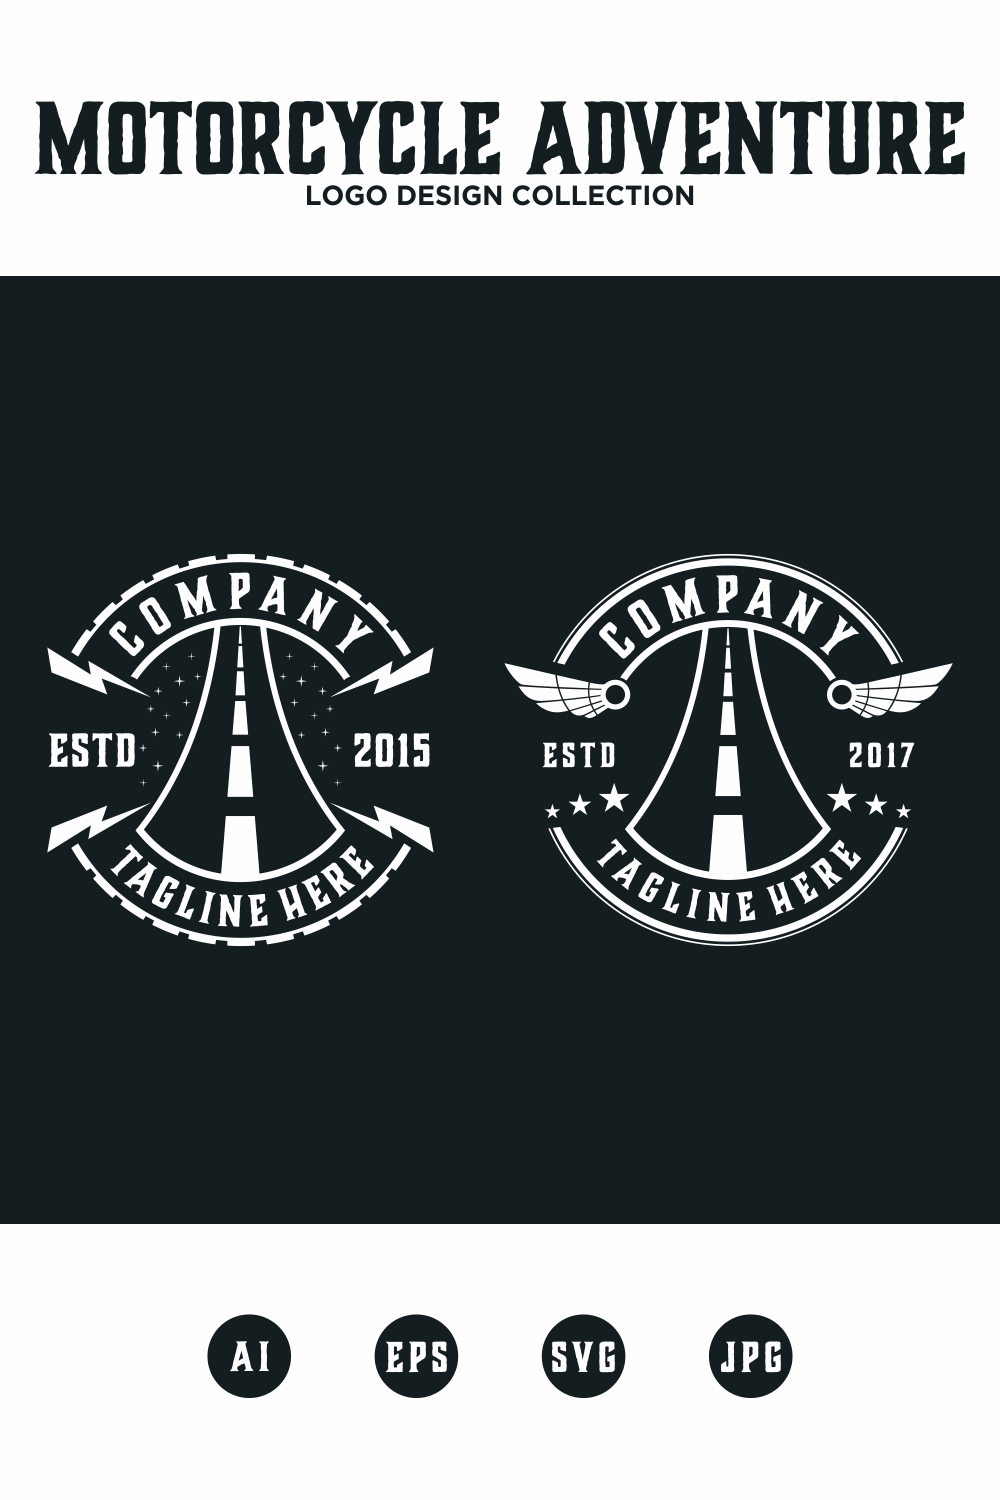 Motorcycle adventure emblem logo Design Collection - only 5$ pinterest preview image.